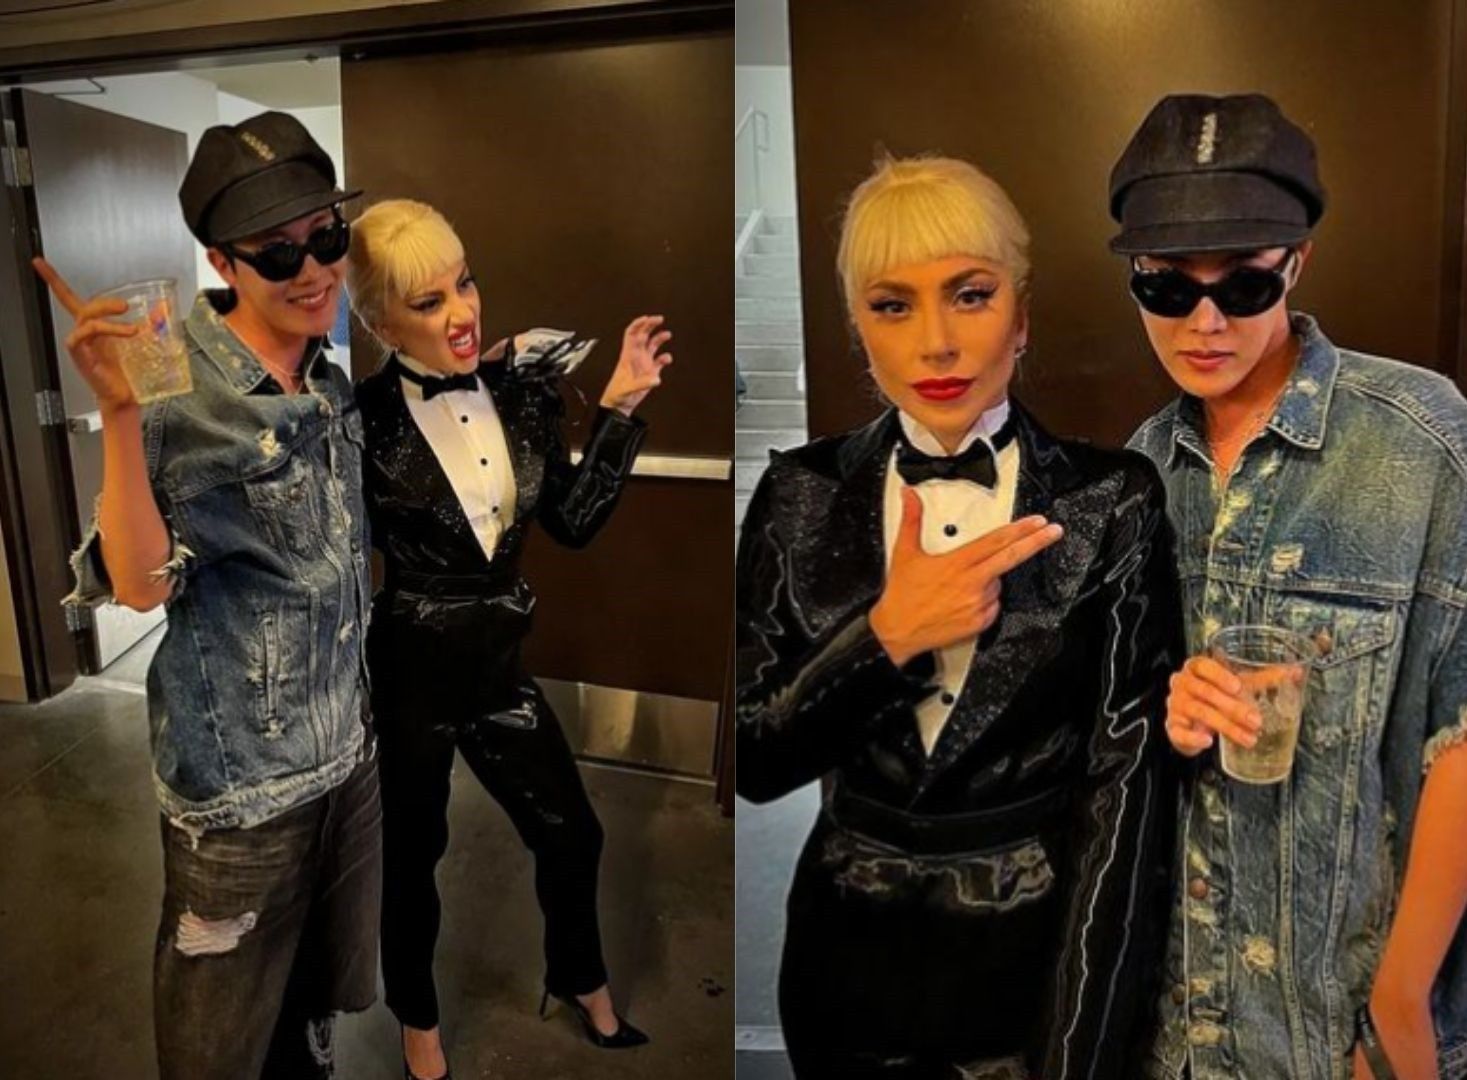 'My queen forever': BTS' J-Hope hangs out with Lady Gaga after Vegas show